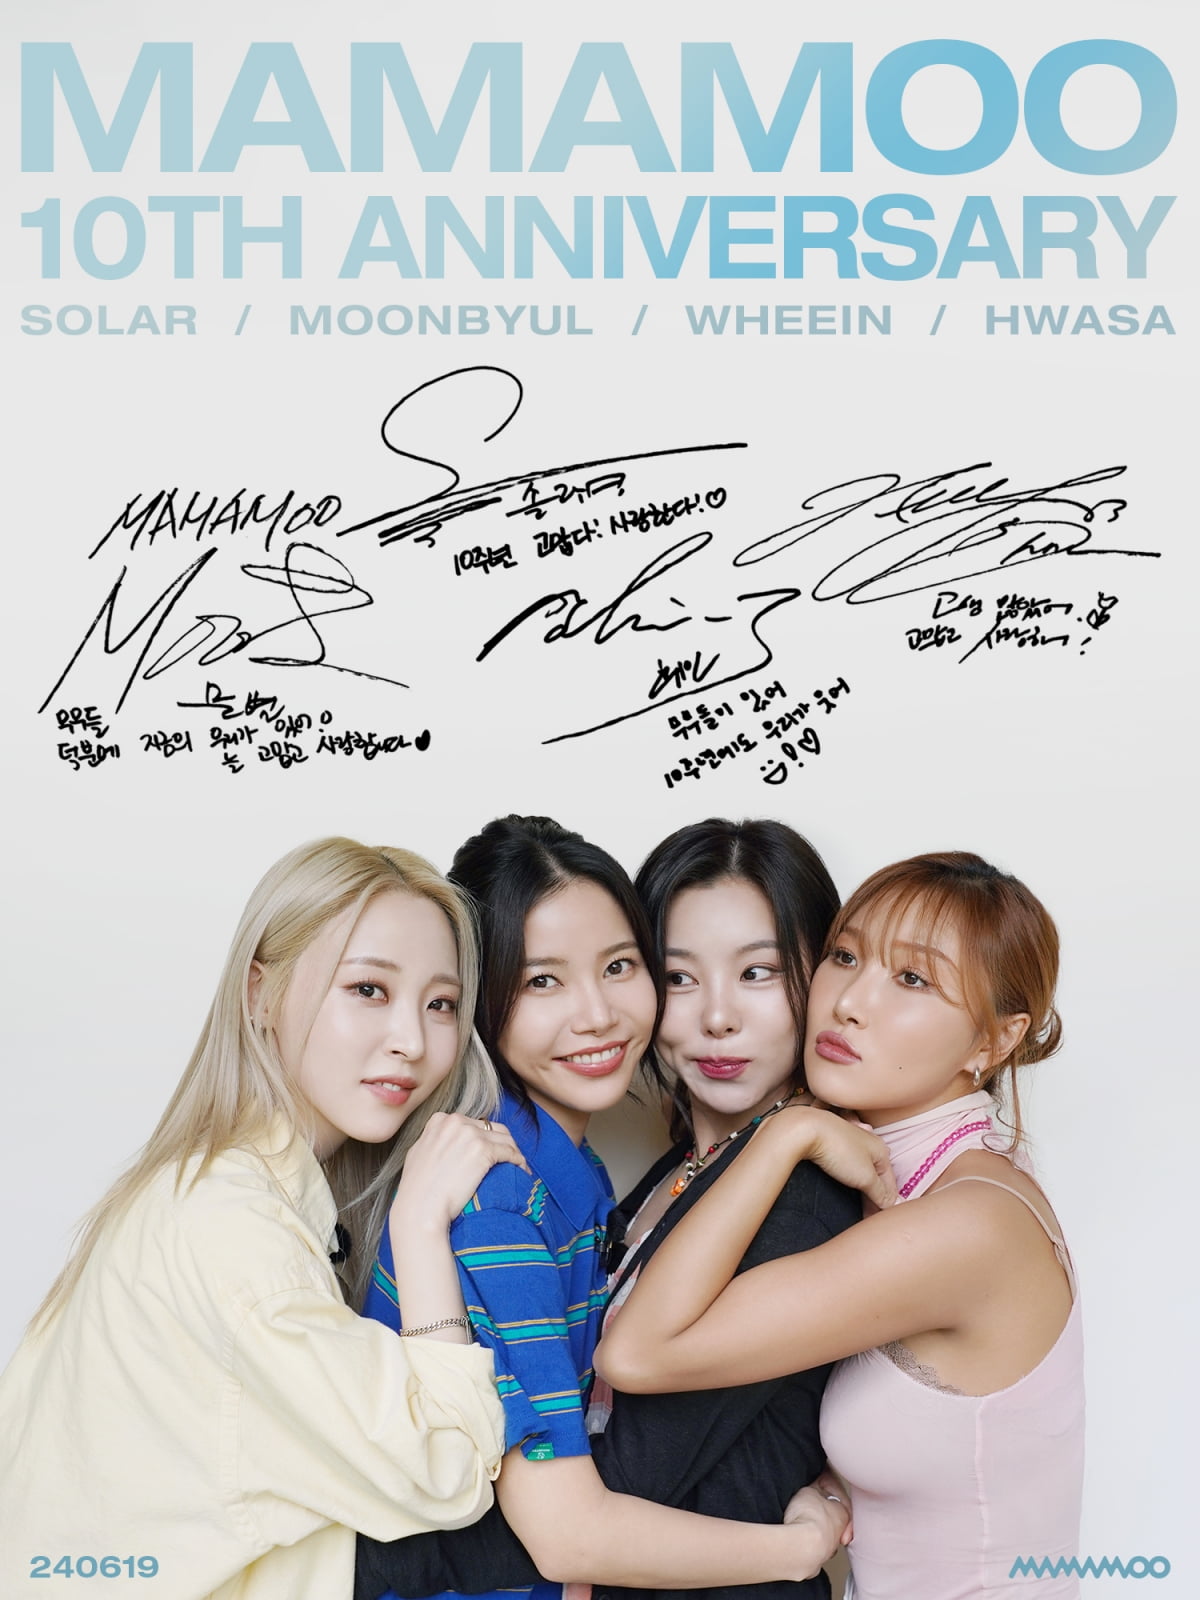 MAMAMOO Shares Thoughts on Their 10th Debut Anniversary with Fans